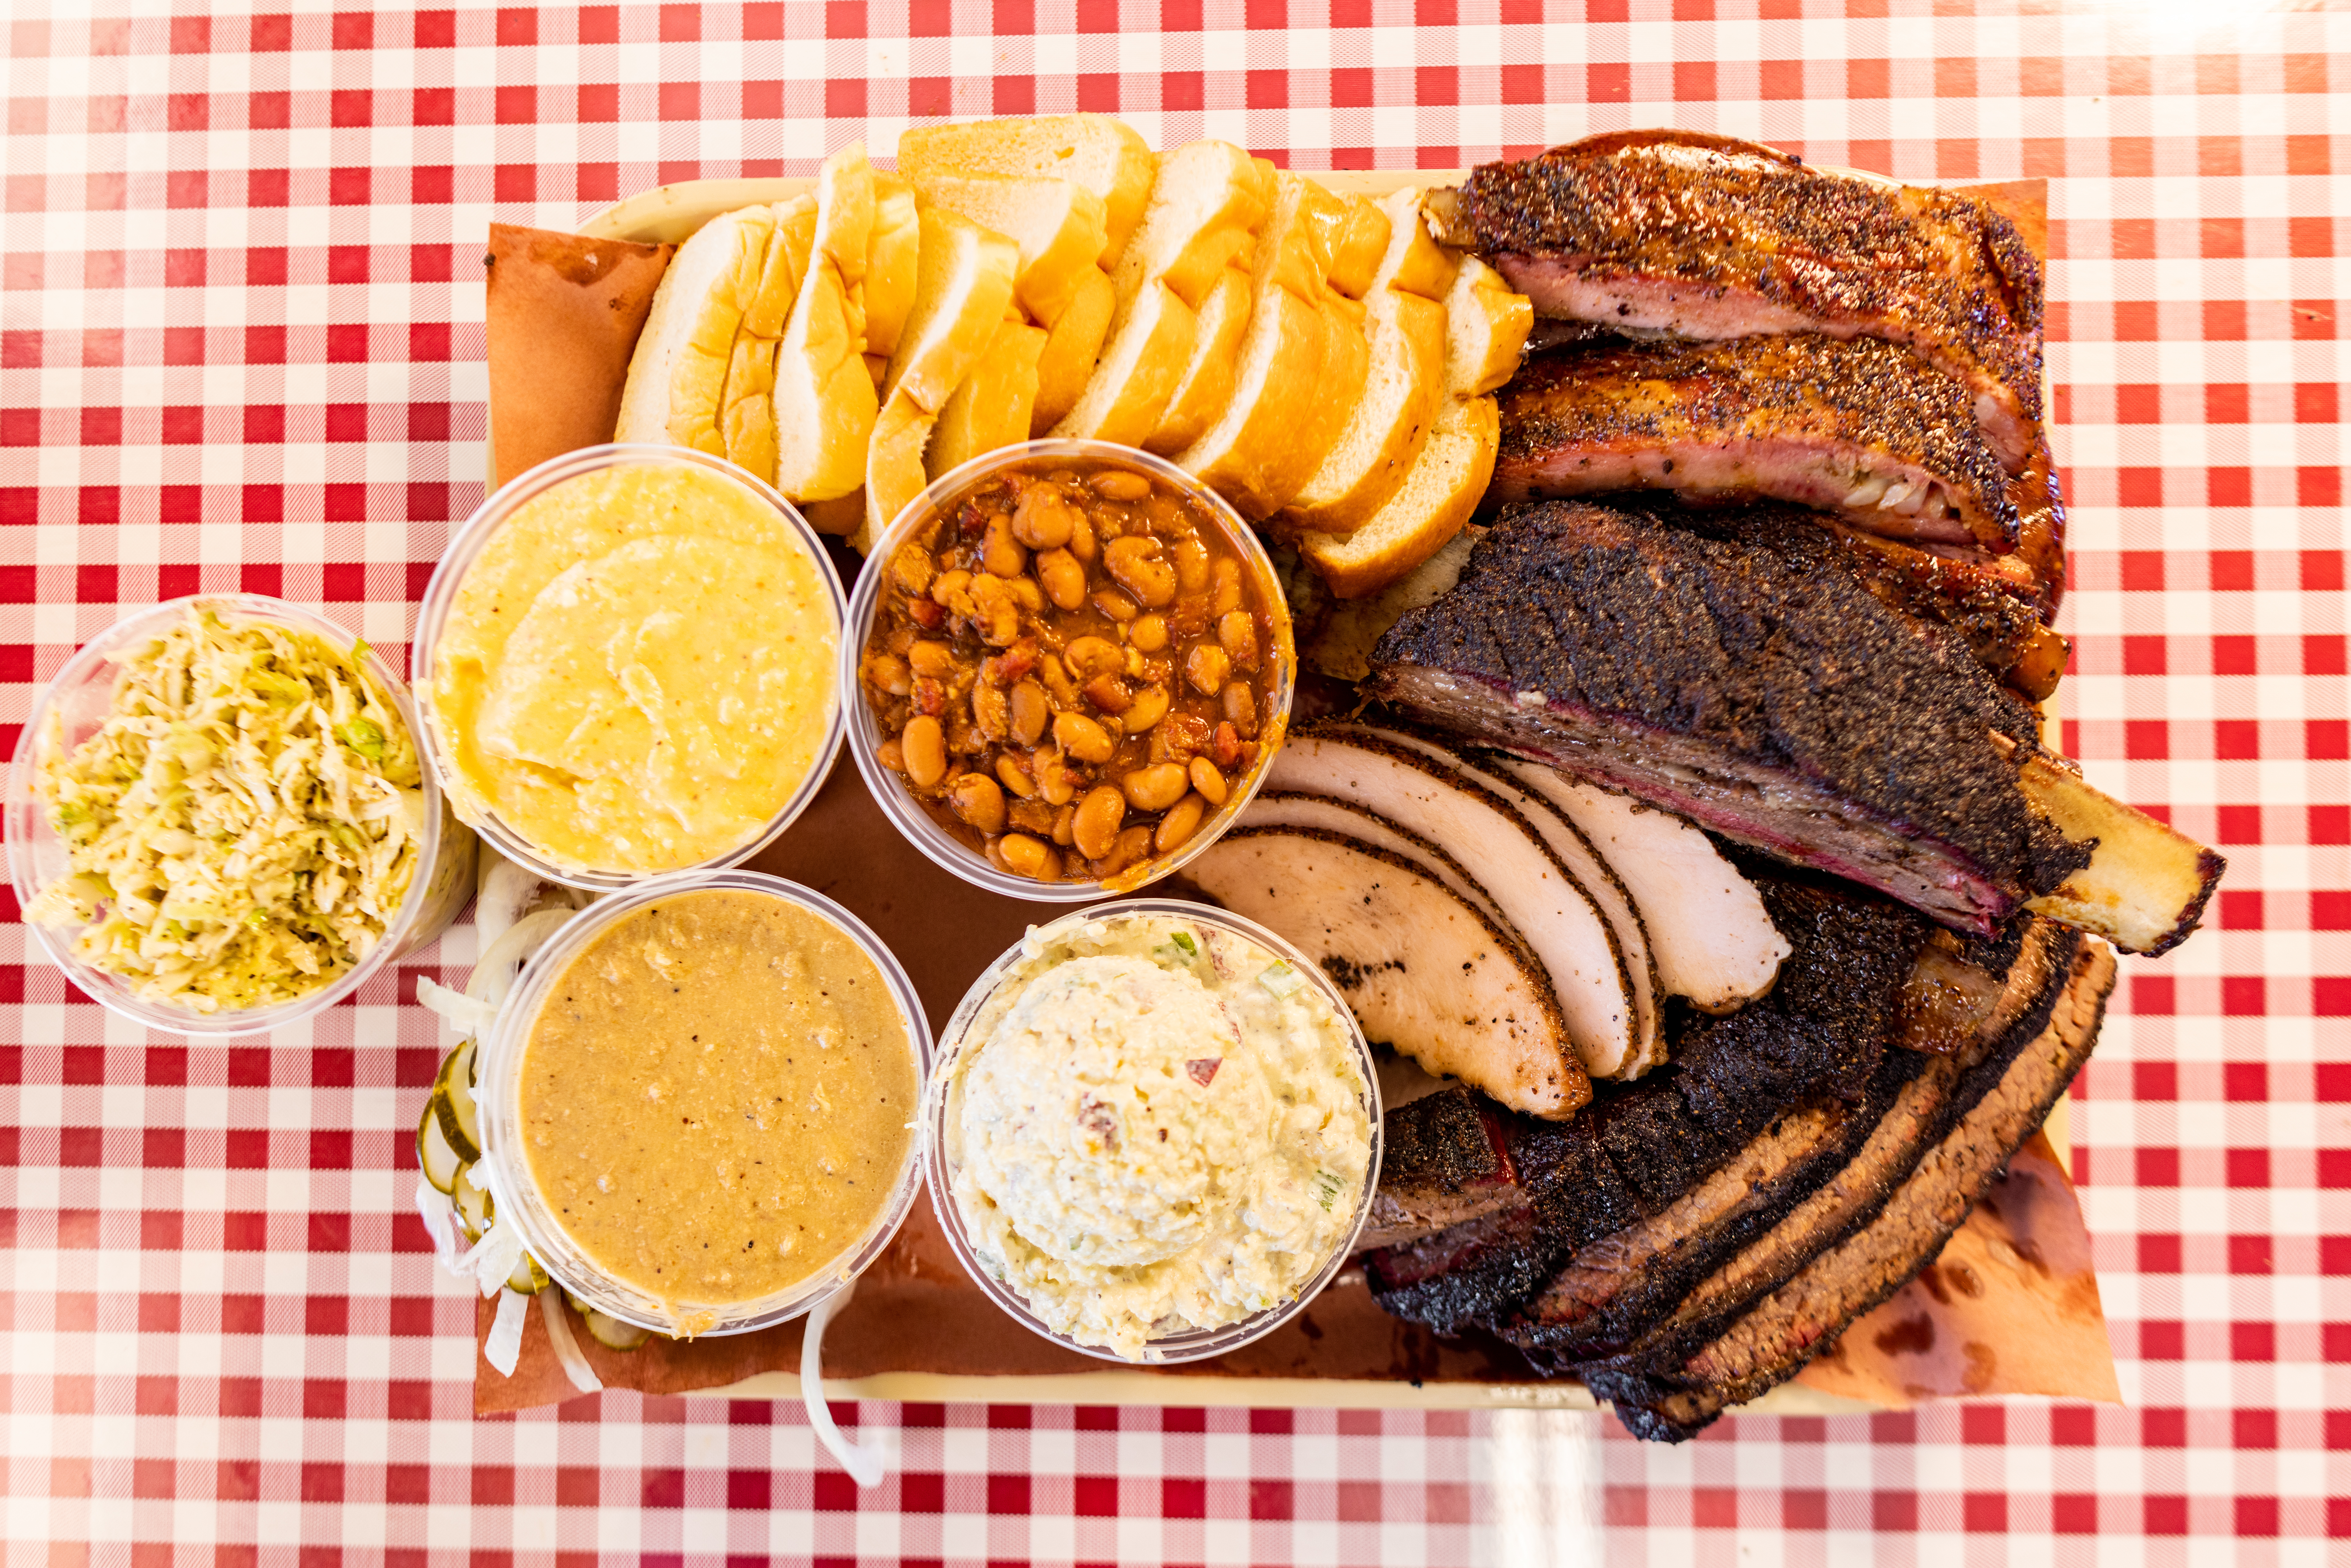 A platter of ribs, brisket, turkey, sliced bread, beans, potato salad, and other sides on a red and white checked tablecloth. 